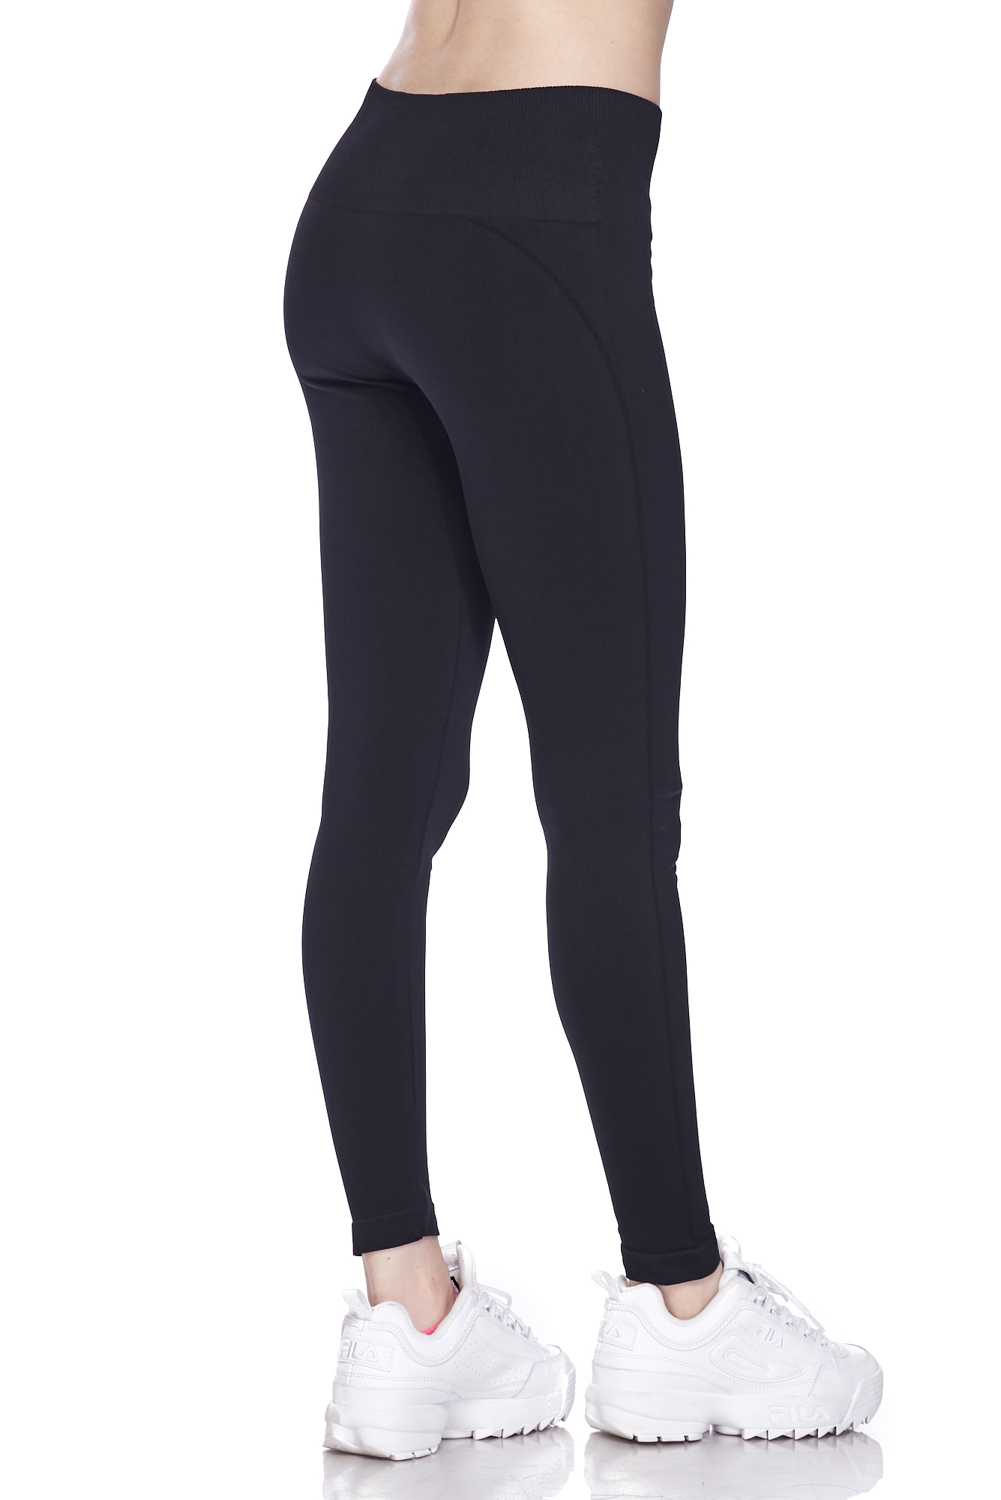 Solid Stretch Seamless Leggings - Its All Leggings